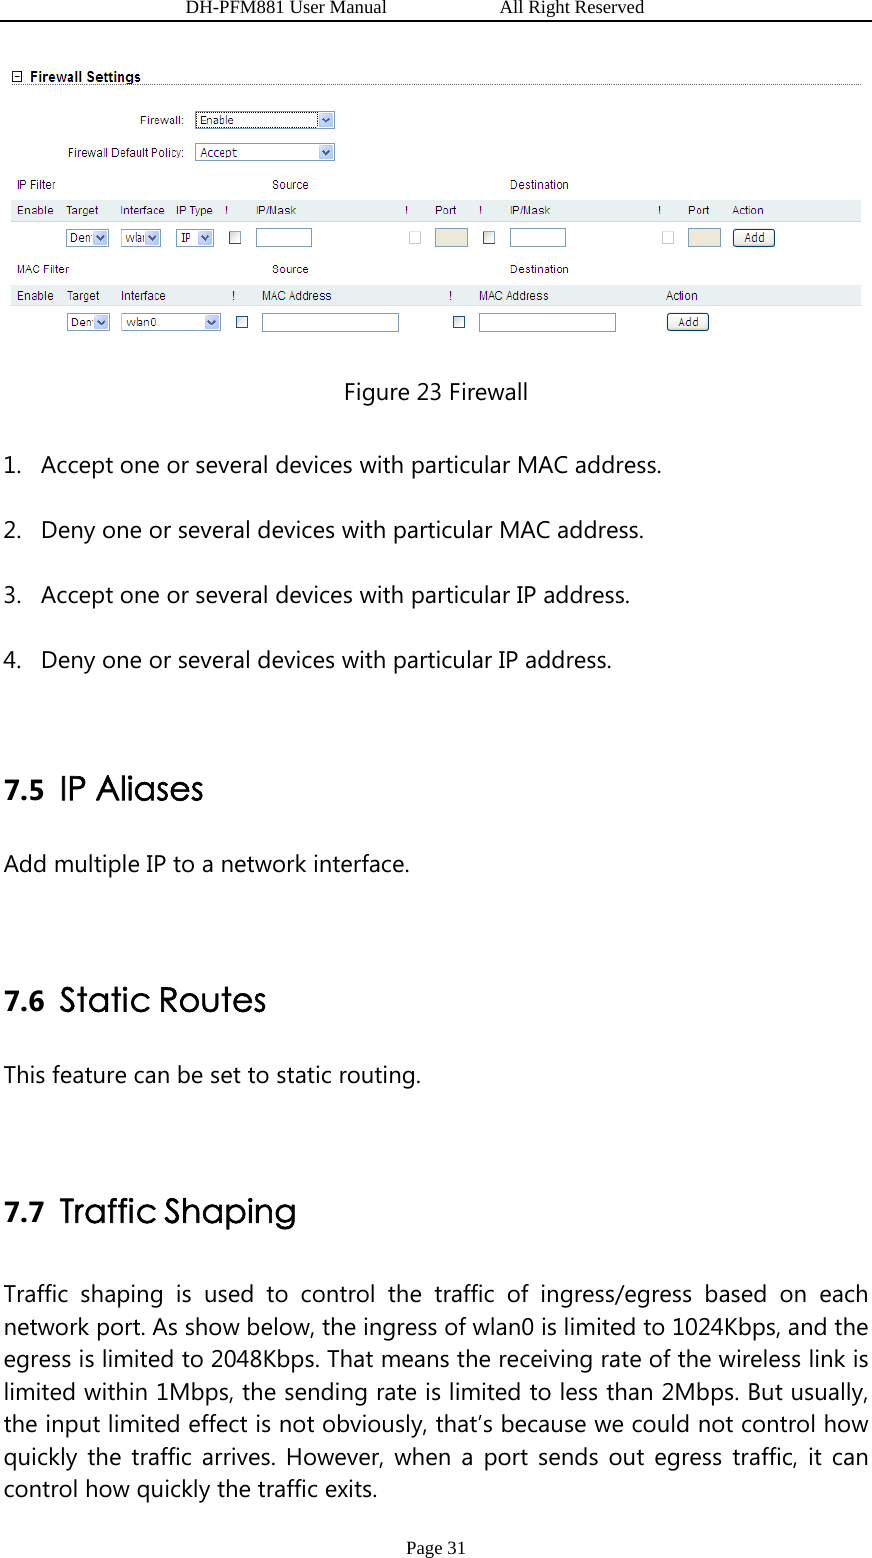                   DH-PFM881 User Manual            All Right Reserved Page 31  Figure 23 Firewall 1. Accept one or several devices with particular MAC address. 2. Deny one or several devices with particular MAC address. 3. Accept one or several devices with particular IP address. 4. Deny one or several devices with particular IP address.  7.5 IP Aliases Add multiple IP to a network interface.  7.6 Static Routes This feature can be set to static routing.  7.7 Traffic Shaping Traffic shaping is used to control the traffic of ingress/egress based on each network port. As show below, the ingress of wlan0 is limited to 1024Kbps, and the egress is limited to 2048Kbps. That means the receiving rate of the wireless link is limited within 1Mbps, the sending rate is limited to less than 2Mbps. But usually, the input limited effect is not obviously, that’s because we could not control how quickly the traffic arrives. However, when a port sends out egress traffic, it can control how quickly the traffic exits. 